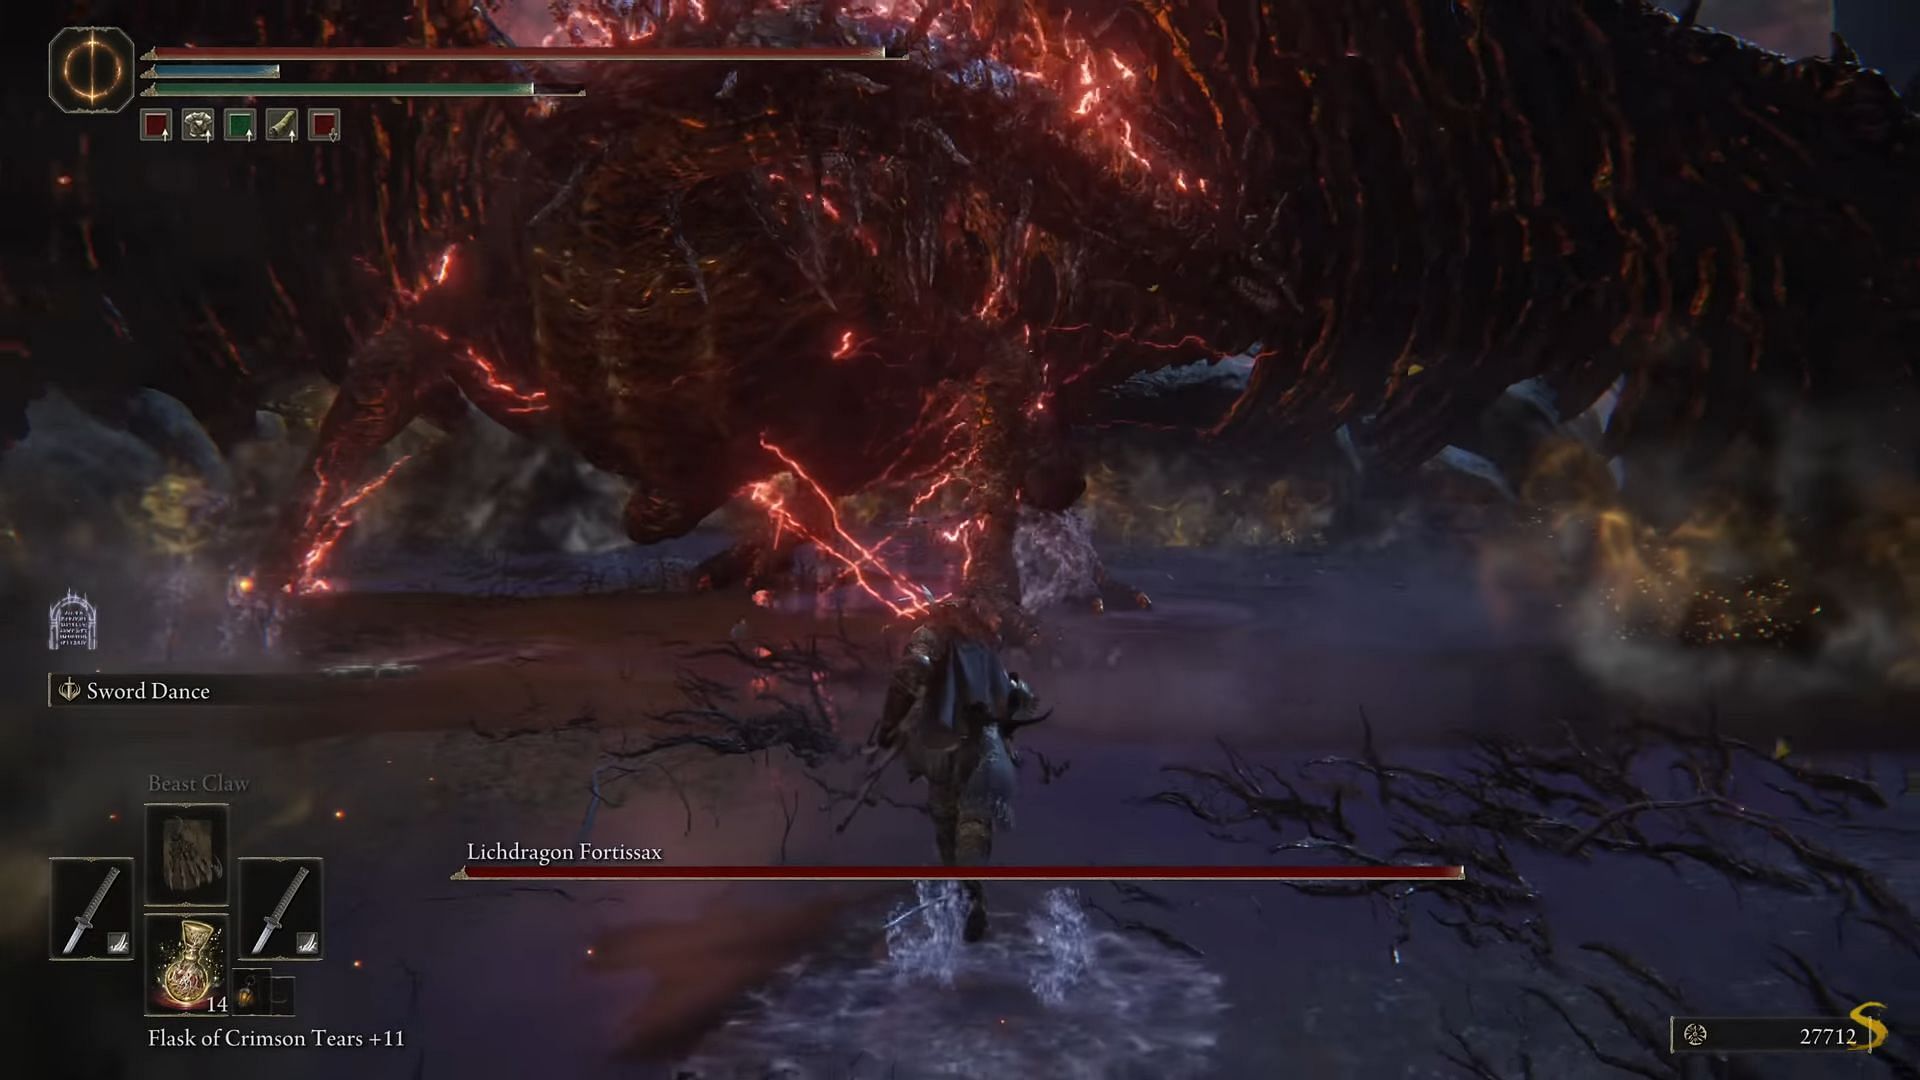 The fight against Lichdragon Fortissax becomes difficulty due to the constricted arena in Elden Ring (Image via Shirrako/Youtube)